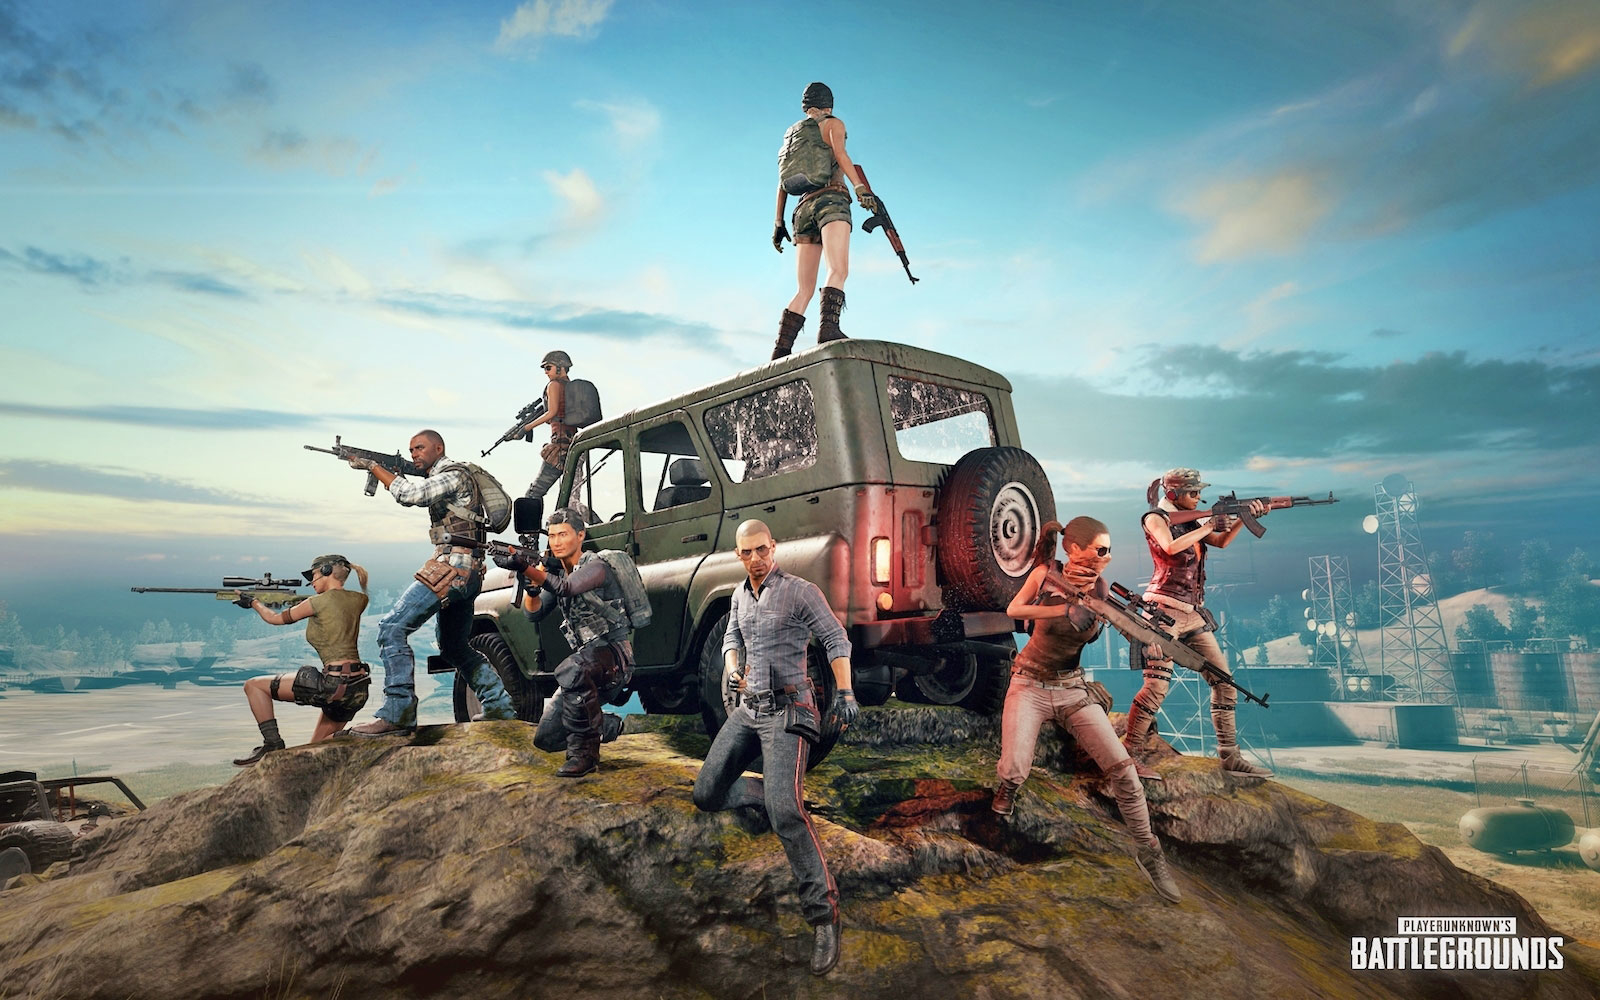 India's Largest PUBG Mobile Championship With ₹50 Lakh ... - 